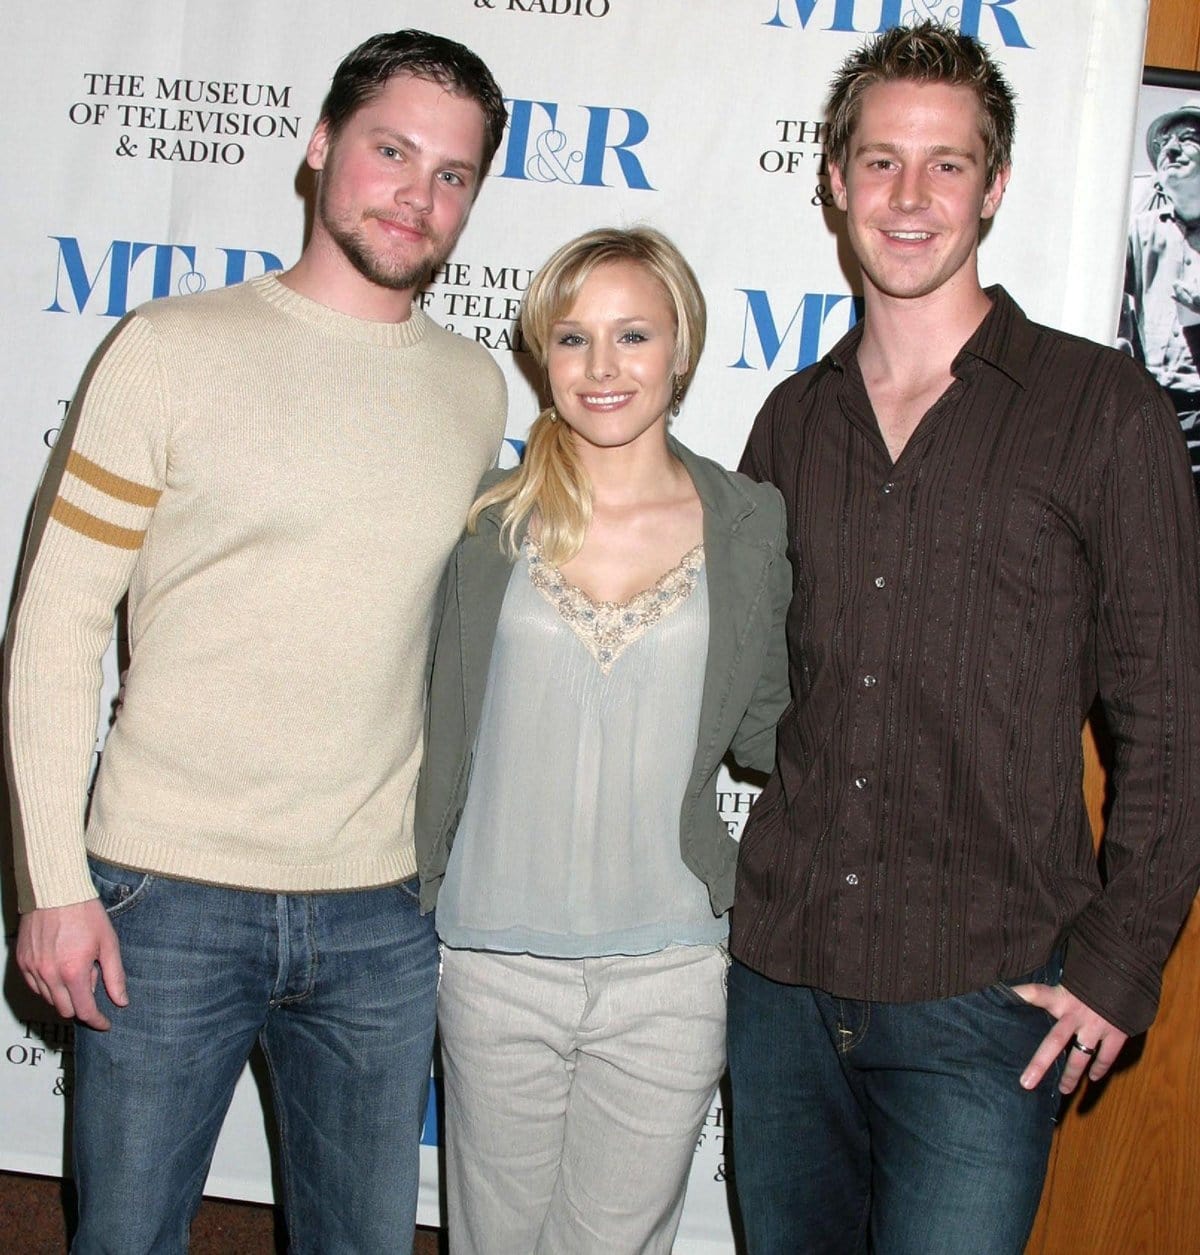 Kristen Bell promoting her television show Veronica Mars with her co-stars Teddy Dunn and Jason Dohring